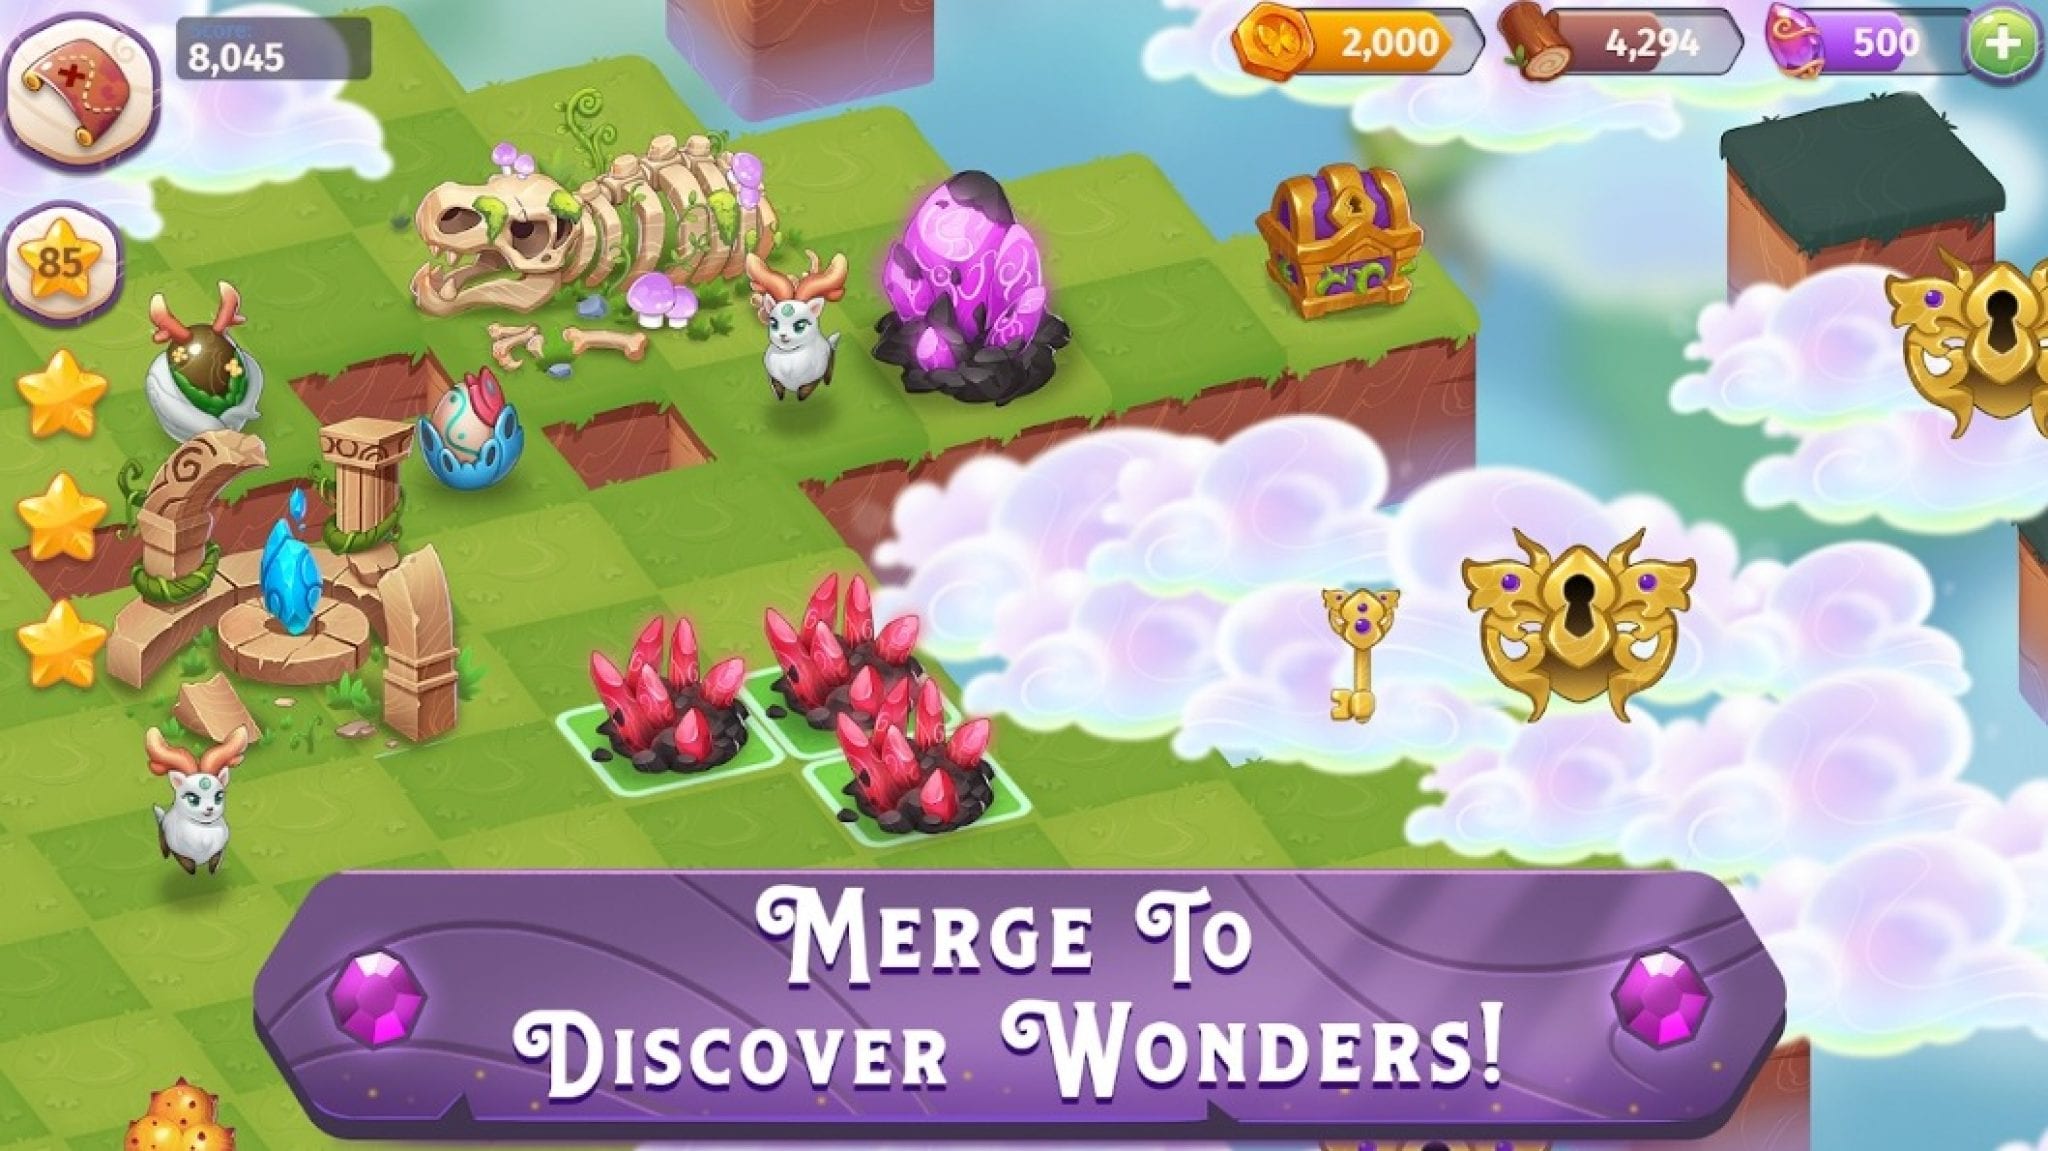 download the new version for windows Merge Adventure: Merge Games